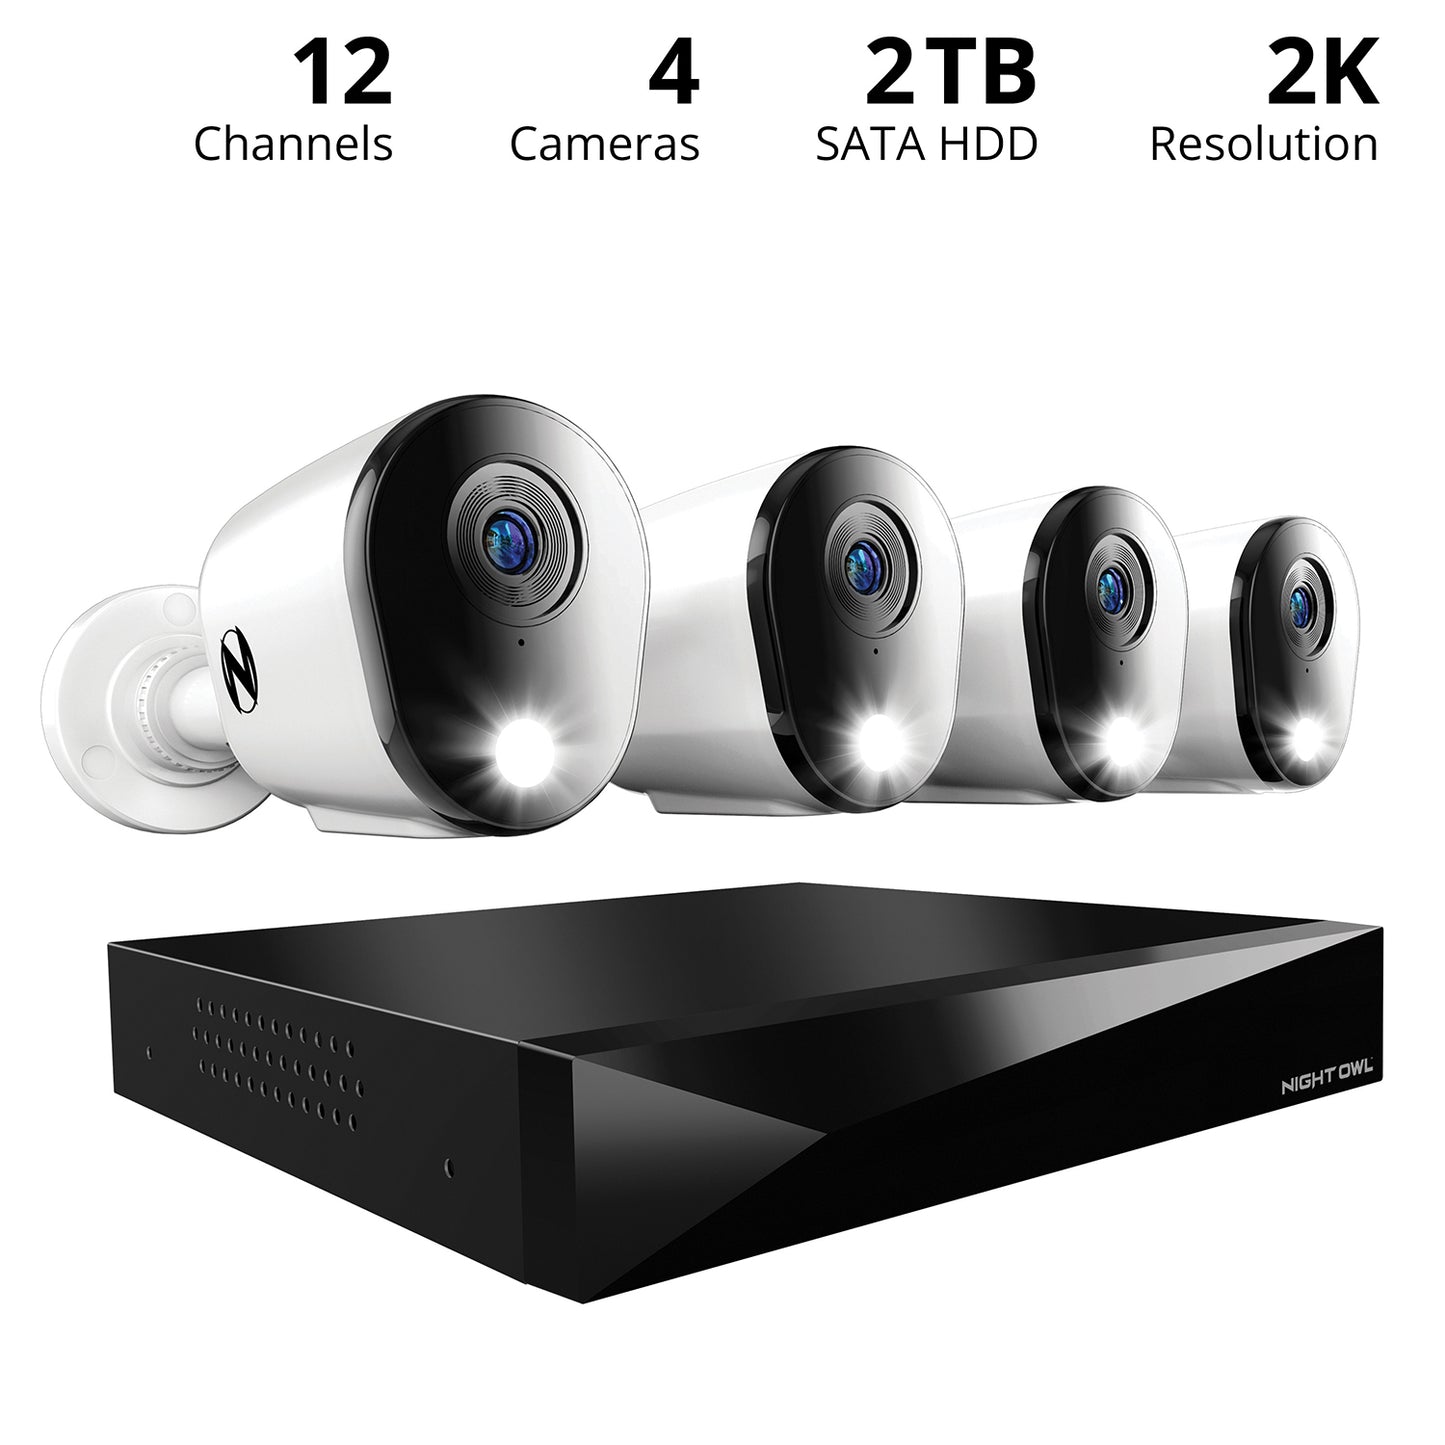 2-Way Audio 12 Channel DVR Security System with 2TB Hard Drive and 4 Wired 2K Deterrence Cameras